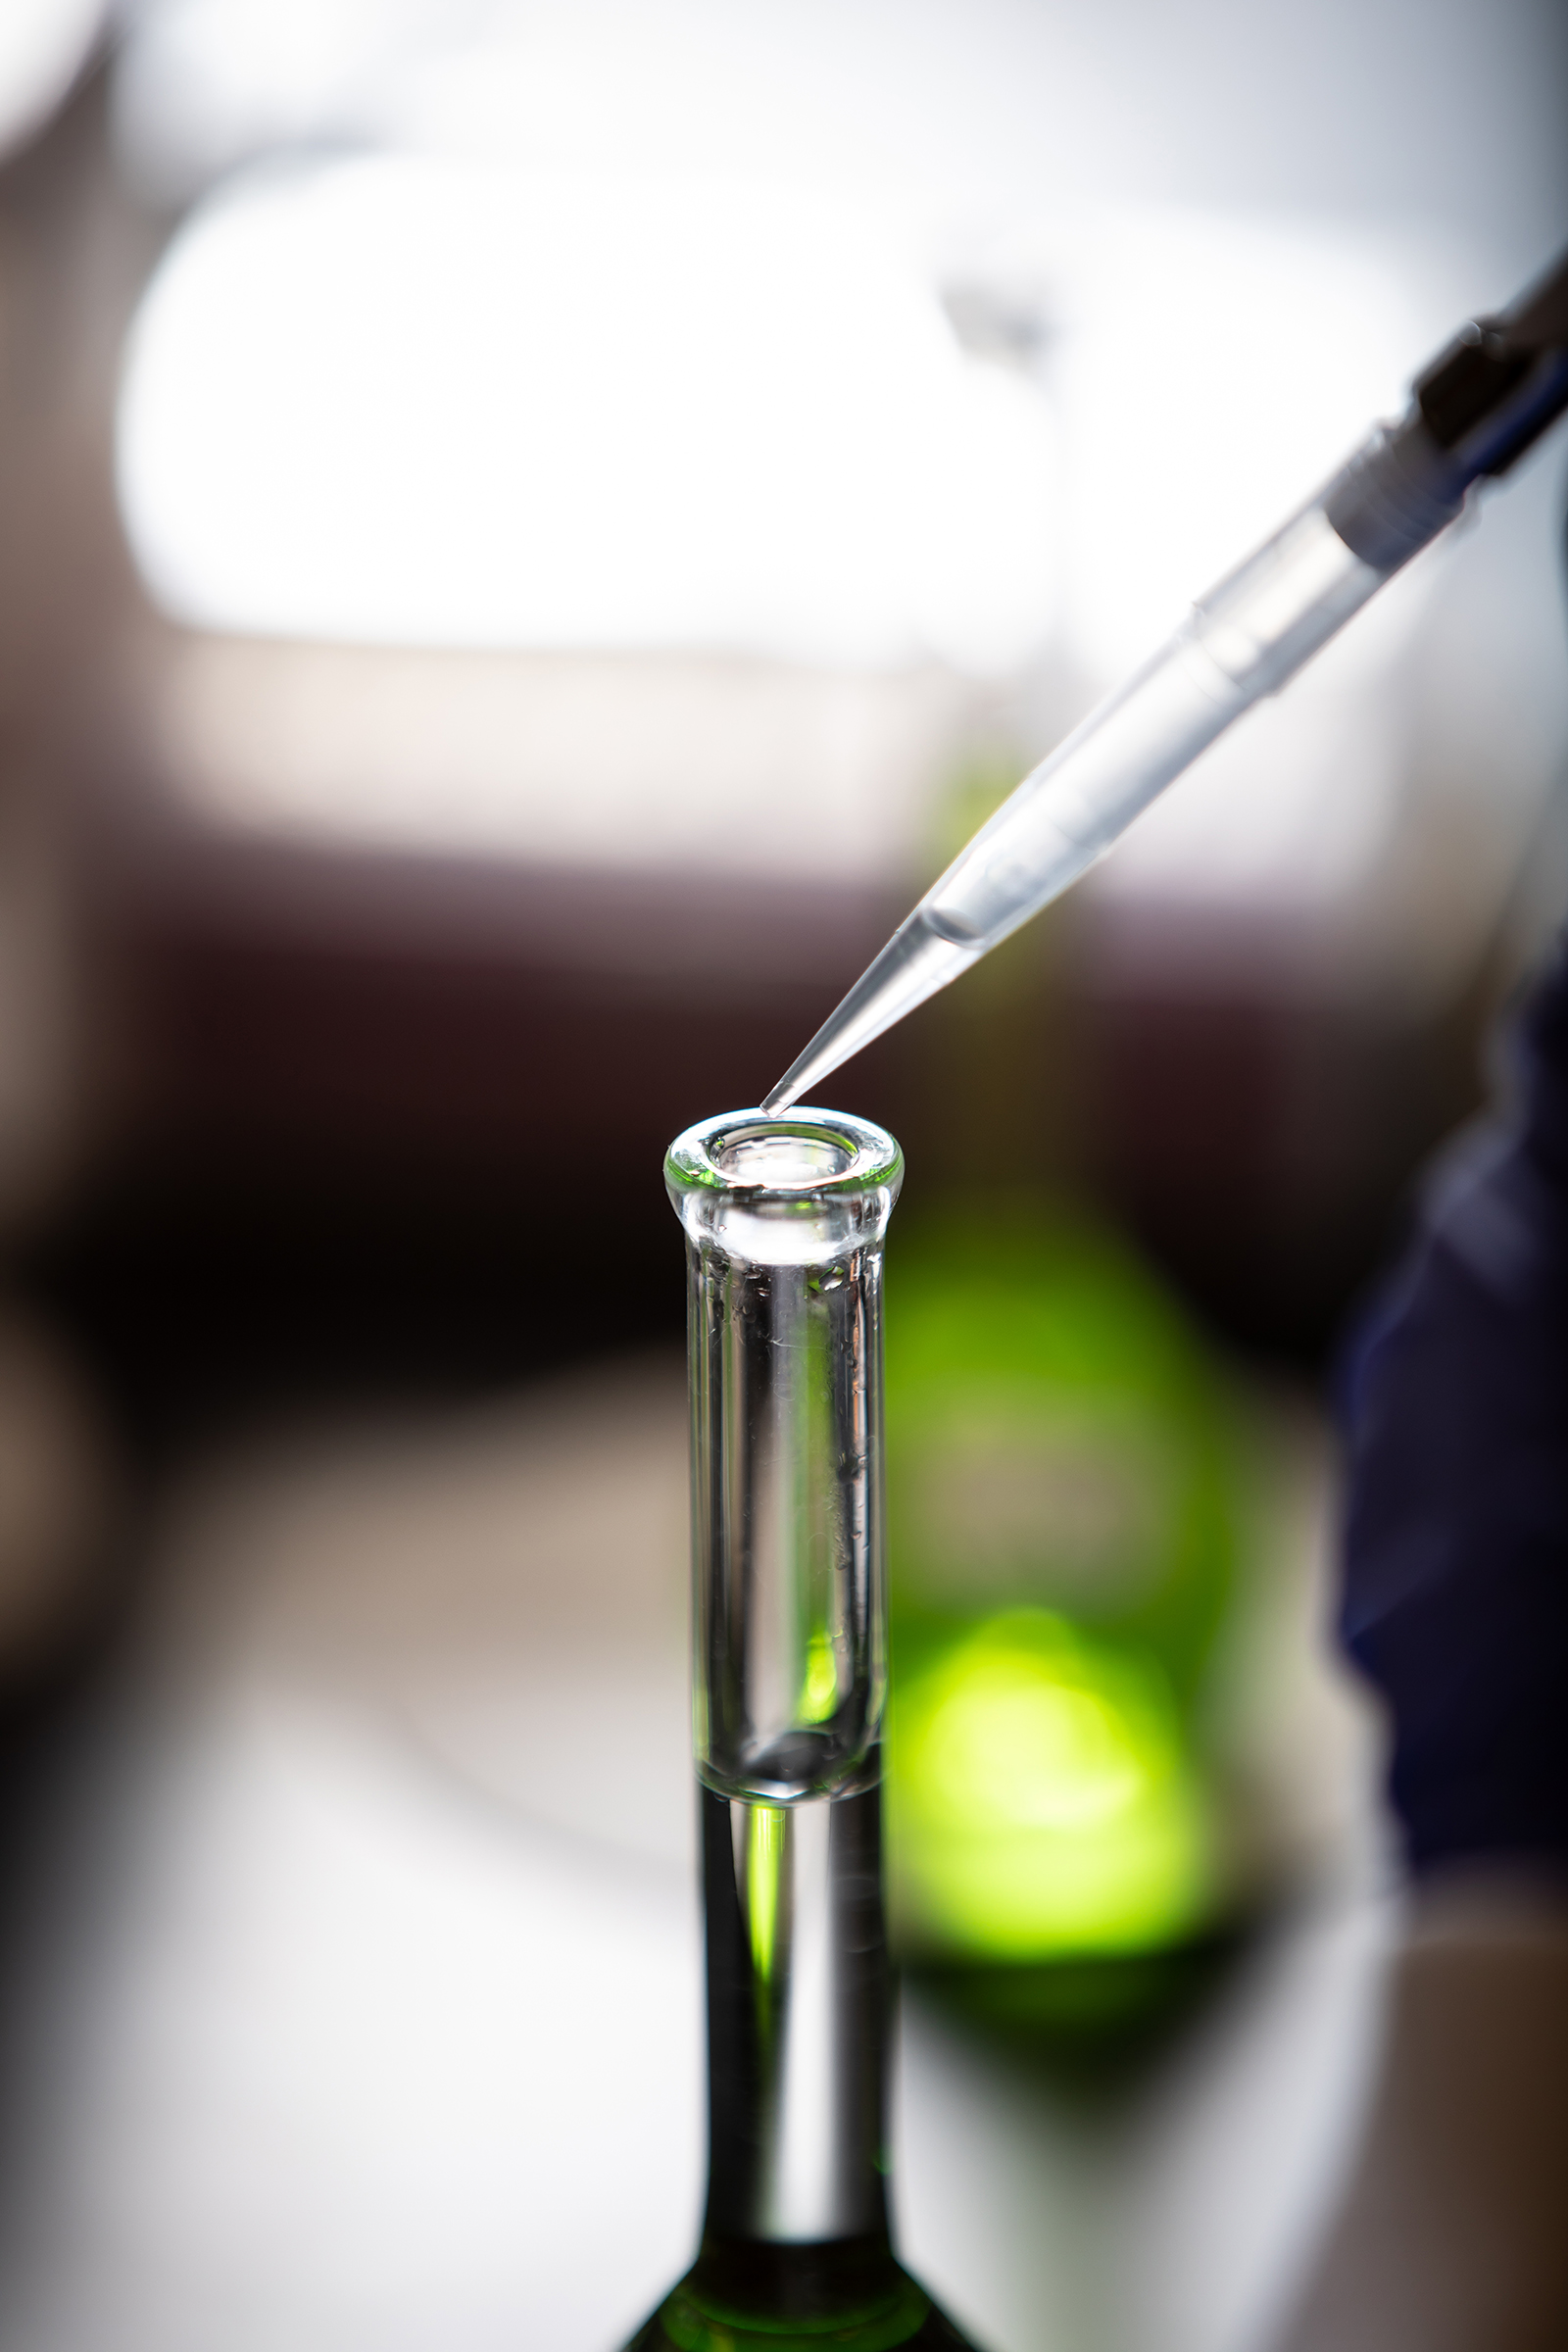 A liquid is dropped into a beaker in a lab.